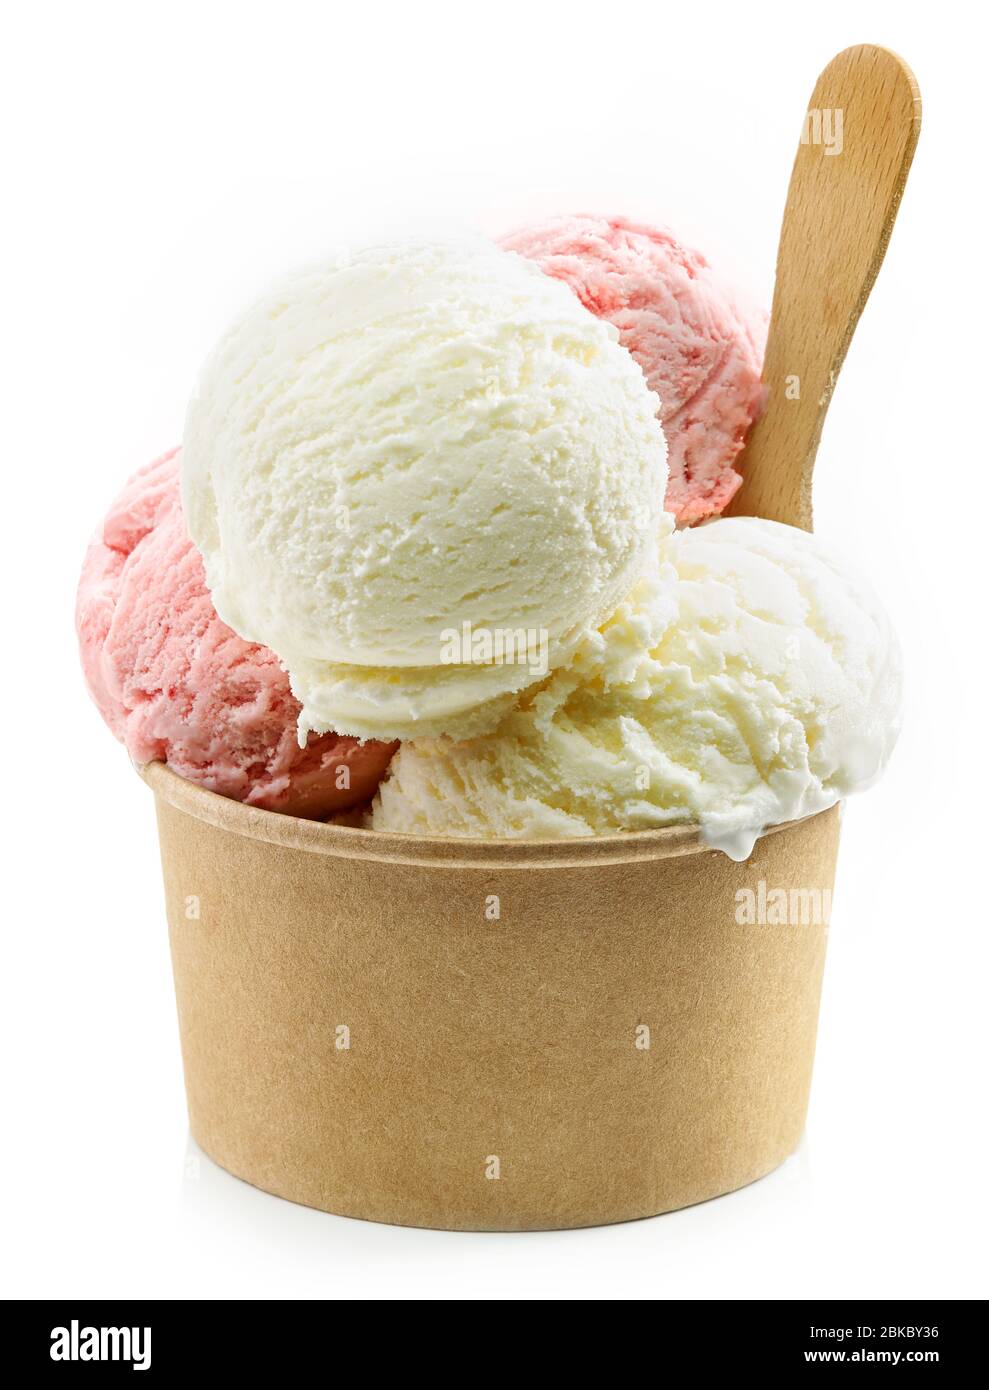 https://c8.alamy.com/comp/2BKBY36/ice-cream-balls-in-paper-cup-isolated-on-white-background-2BKBY36.jpg